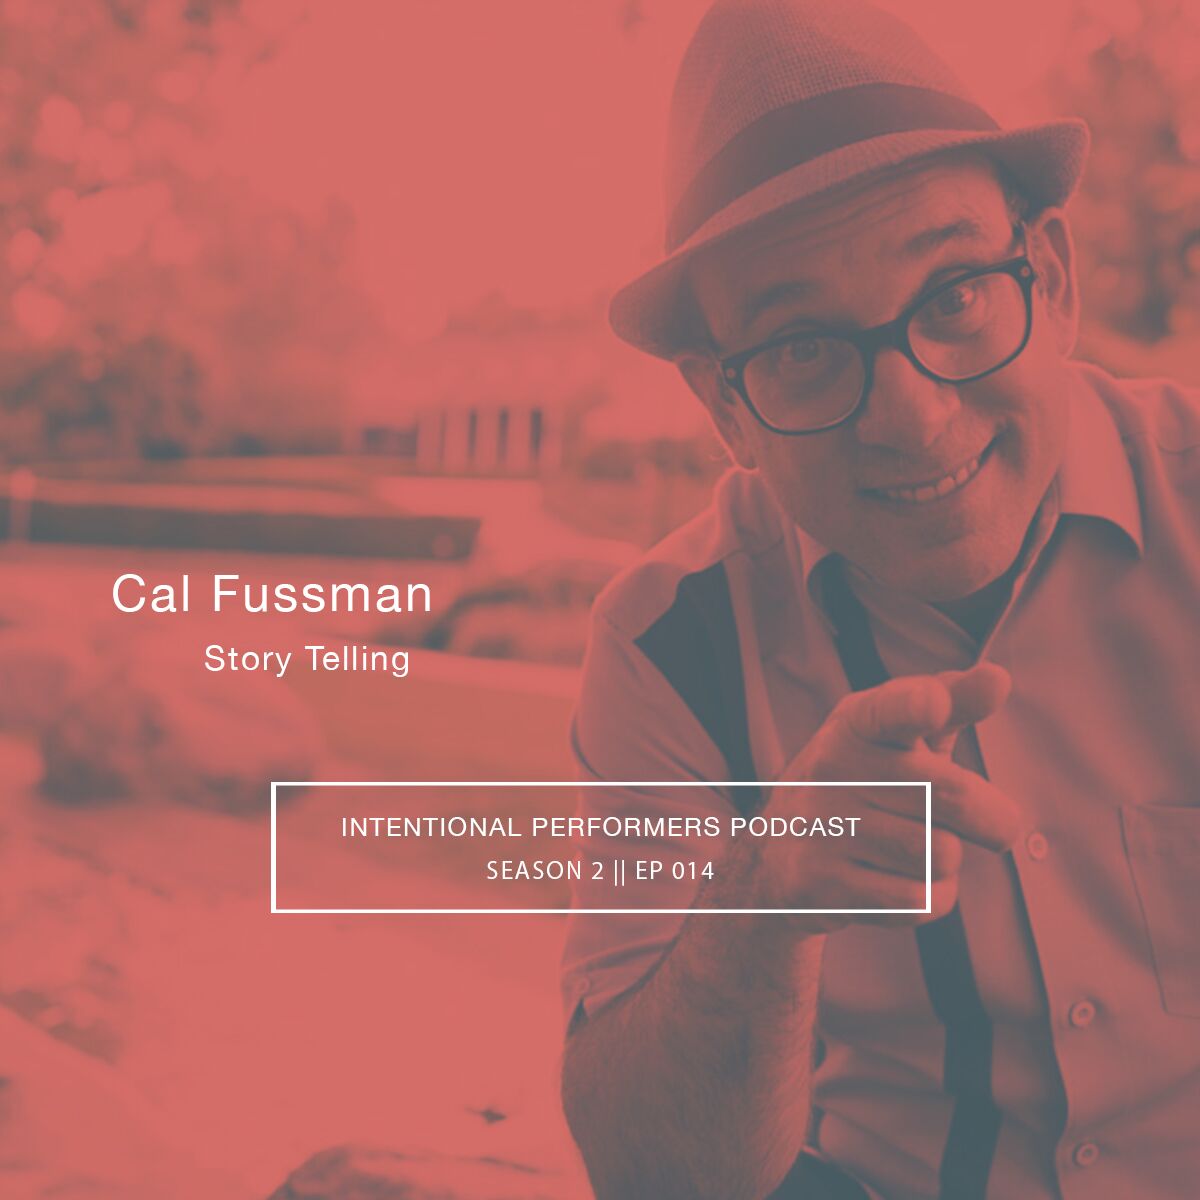 Story Telling with Cal Fussman